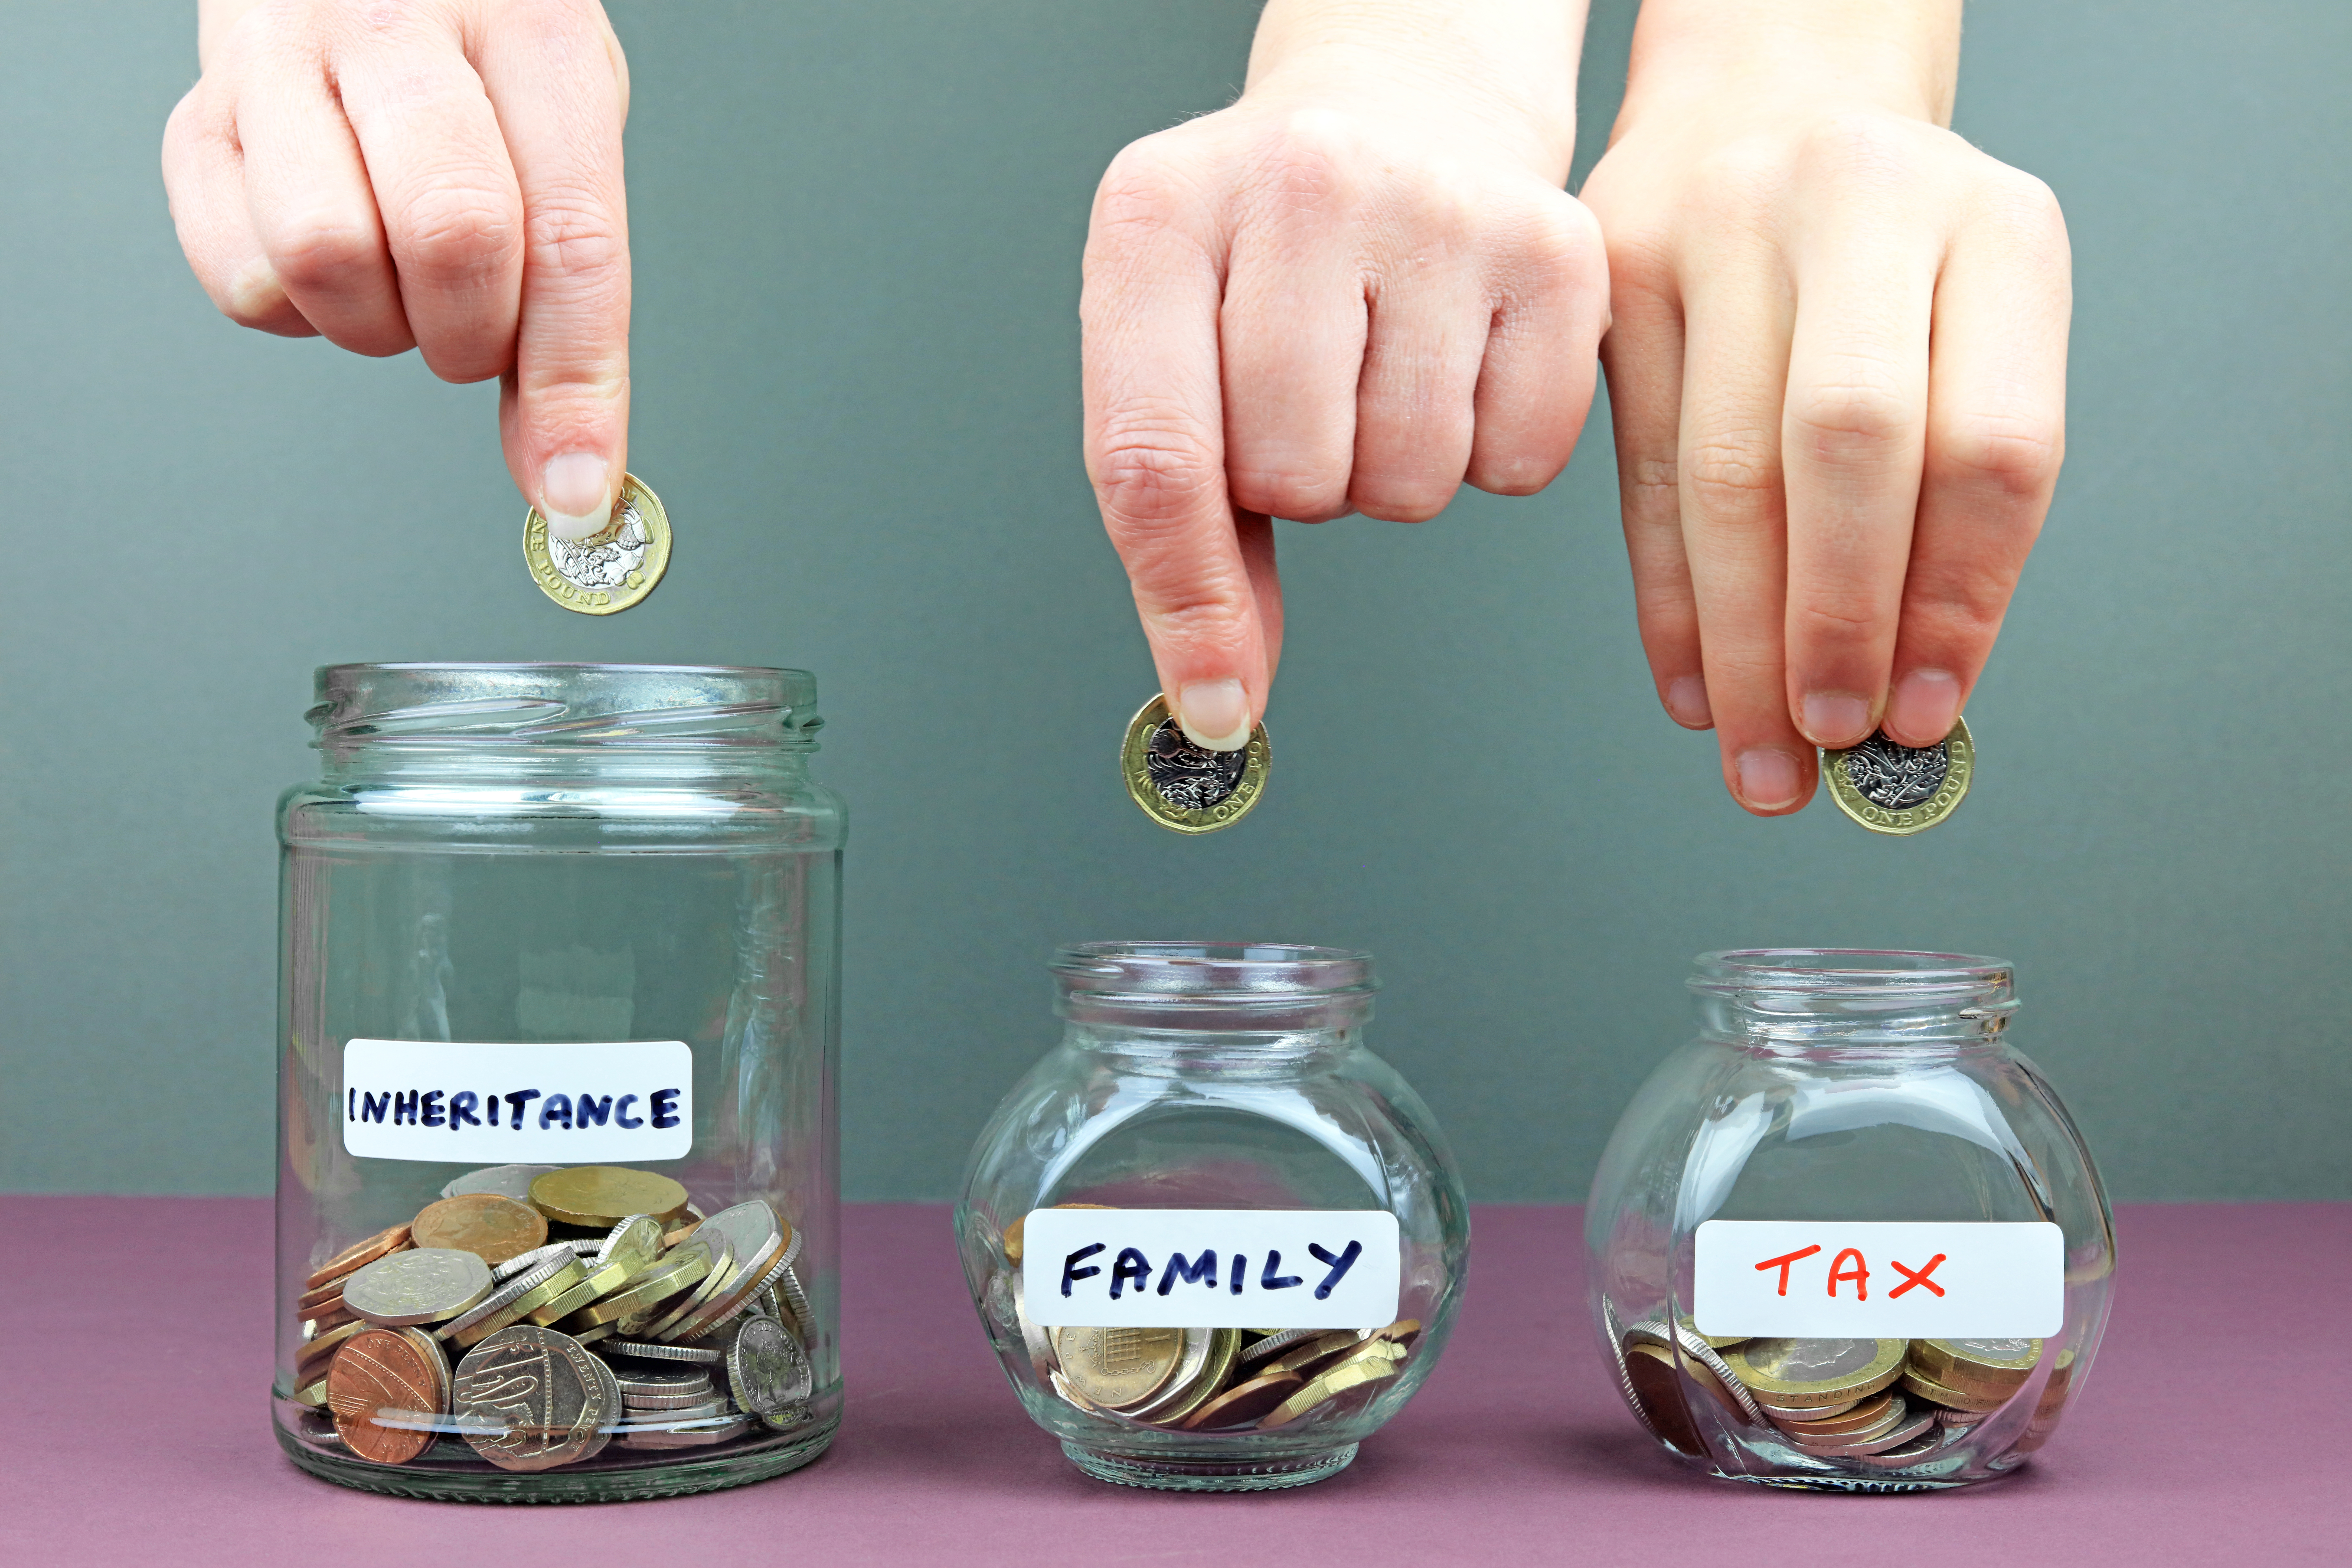 Two-thirds of Brits in the dark over inheritance tax rules